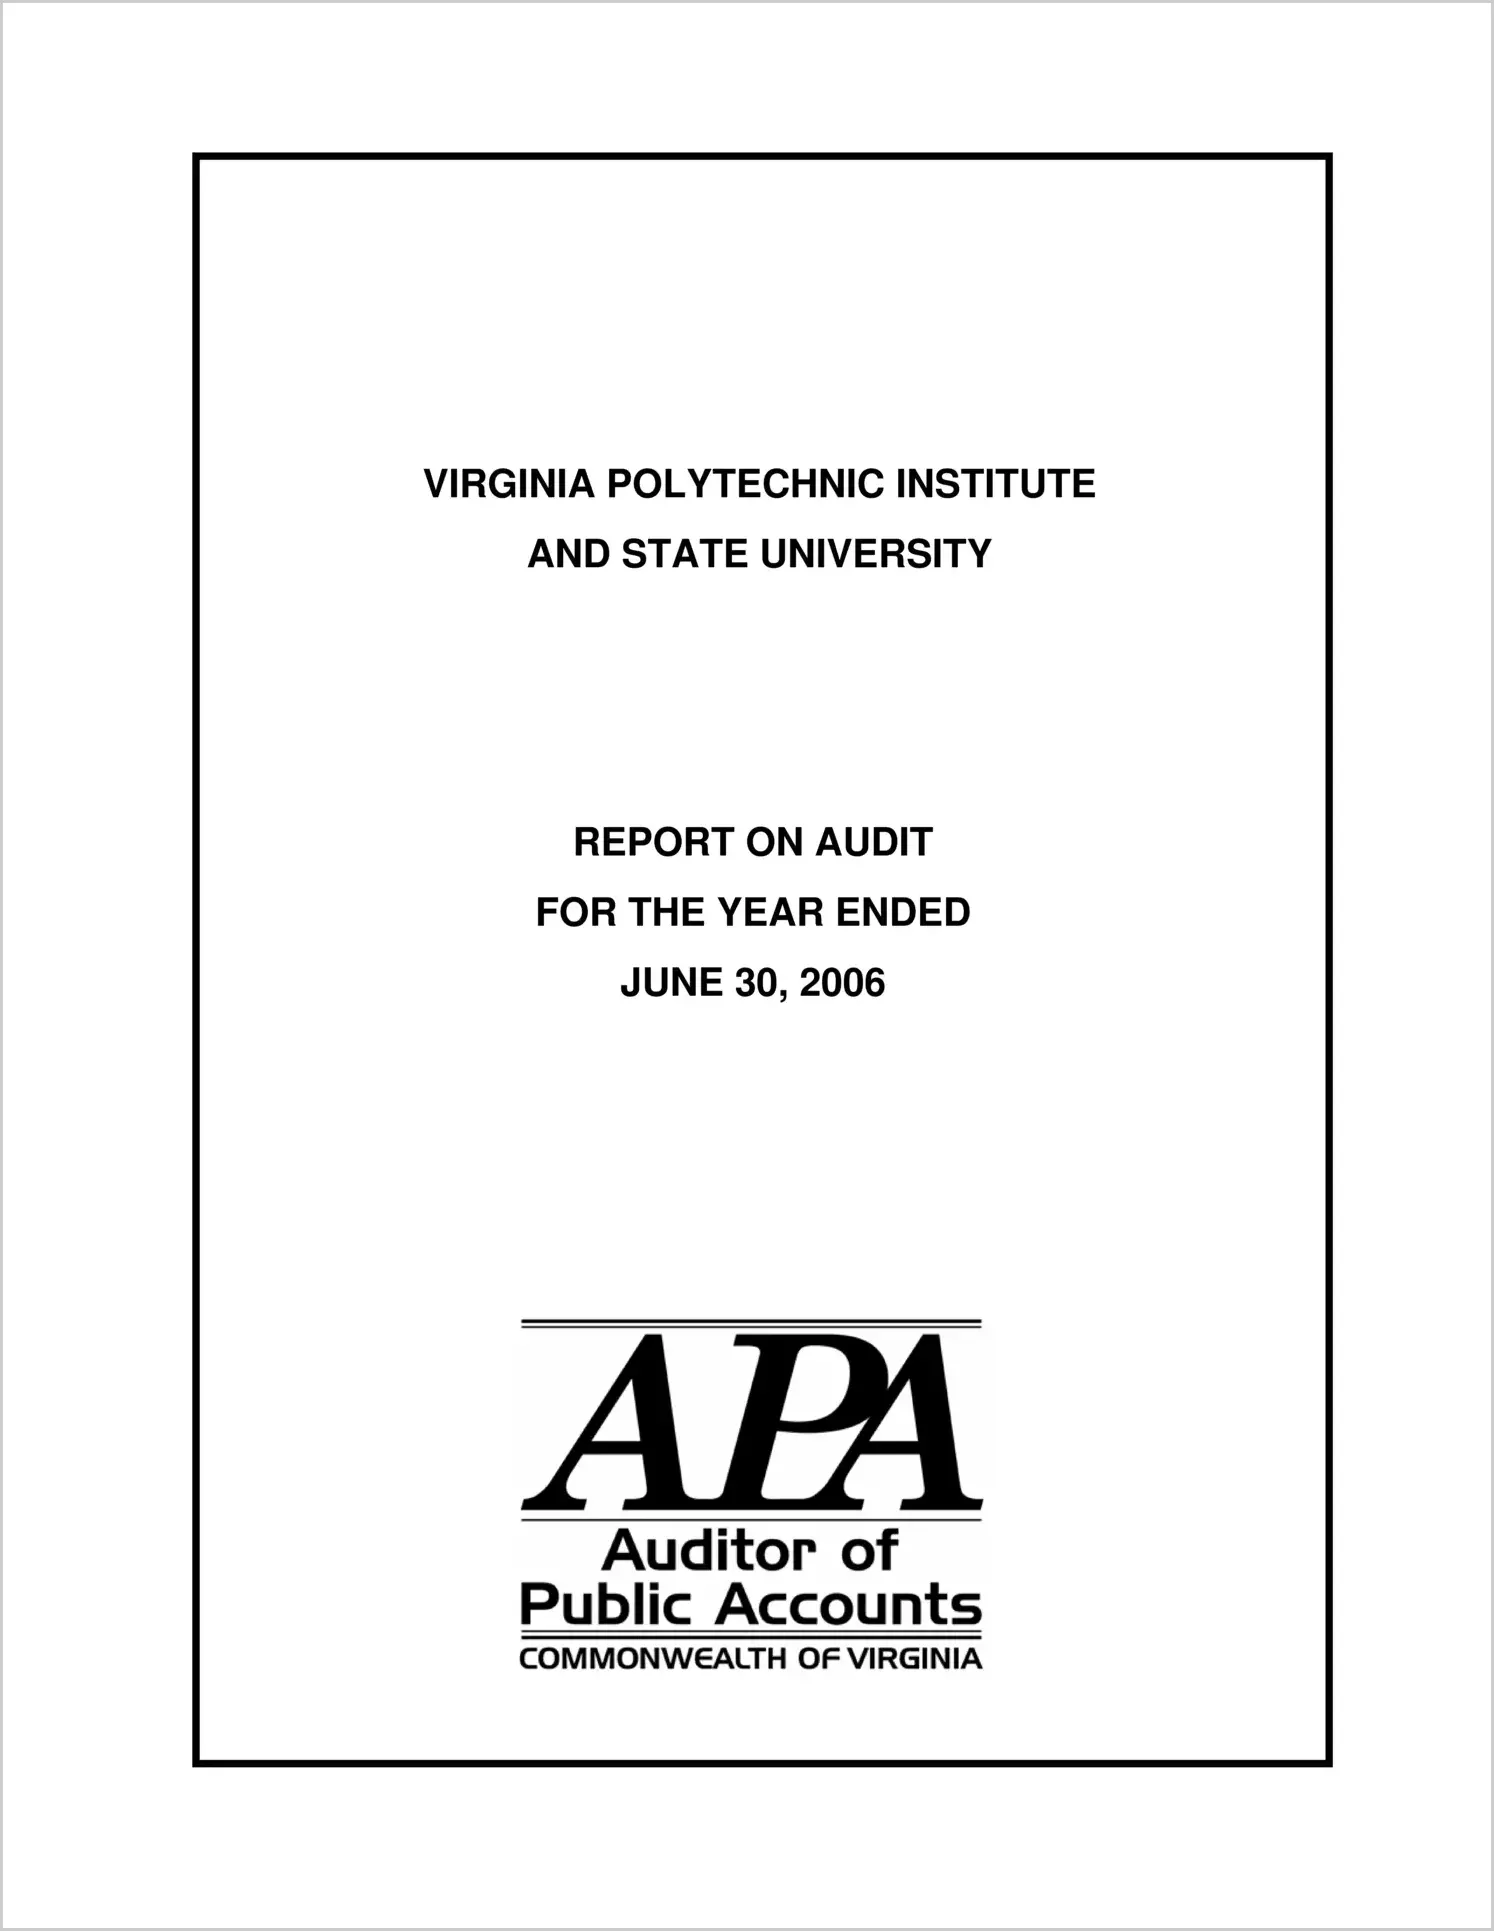 Virginia Polytechnic Institute and State University for the year ended June 30, 2006